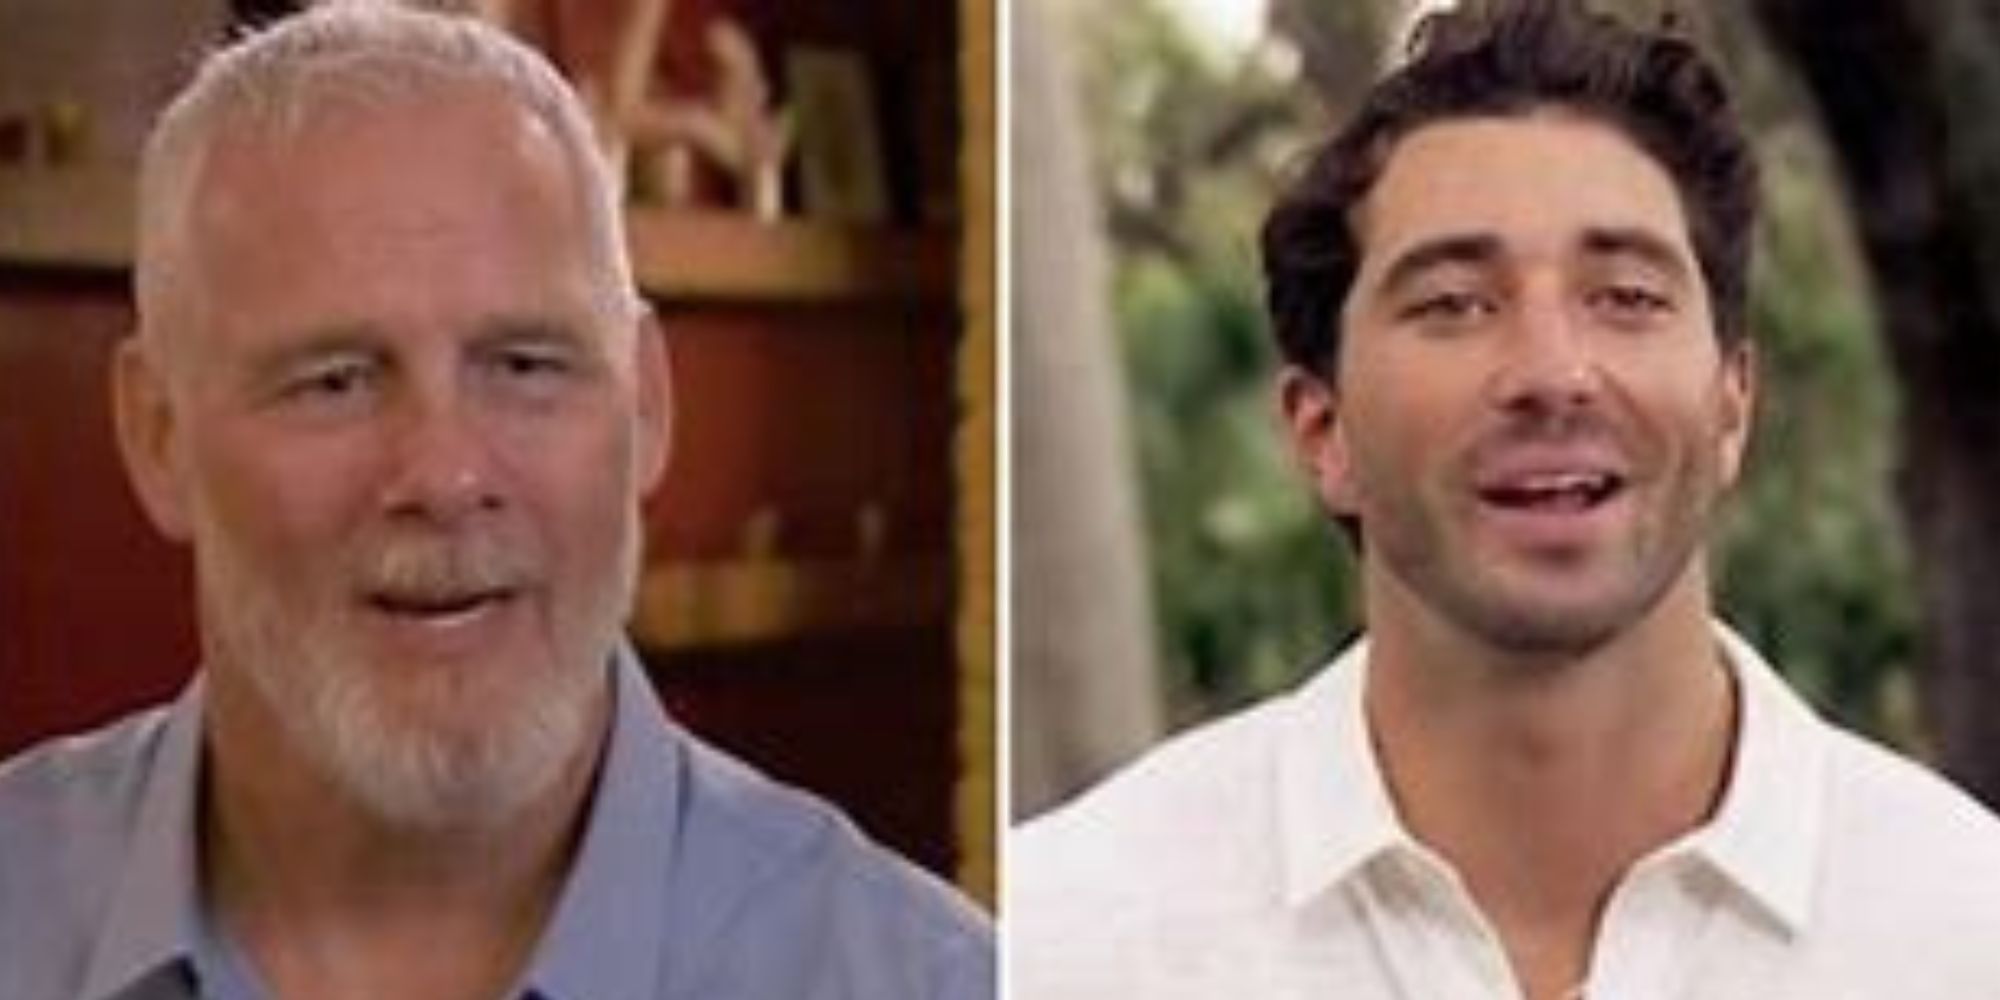 The bachelor season 28 joey graziadei and kelsey anderson's dad Mark Anderson, split screen stills from the show